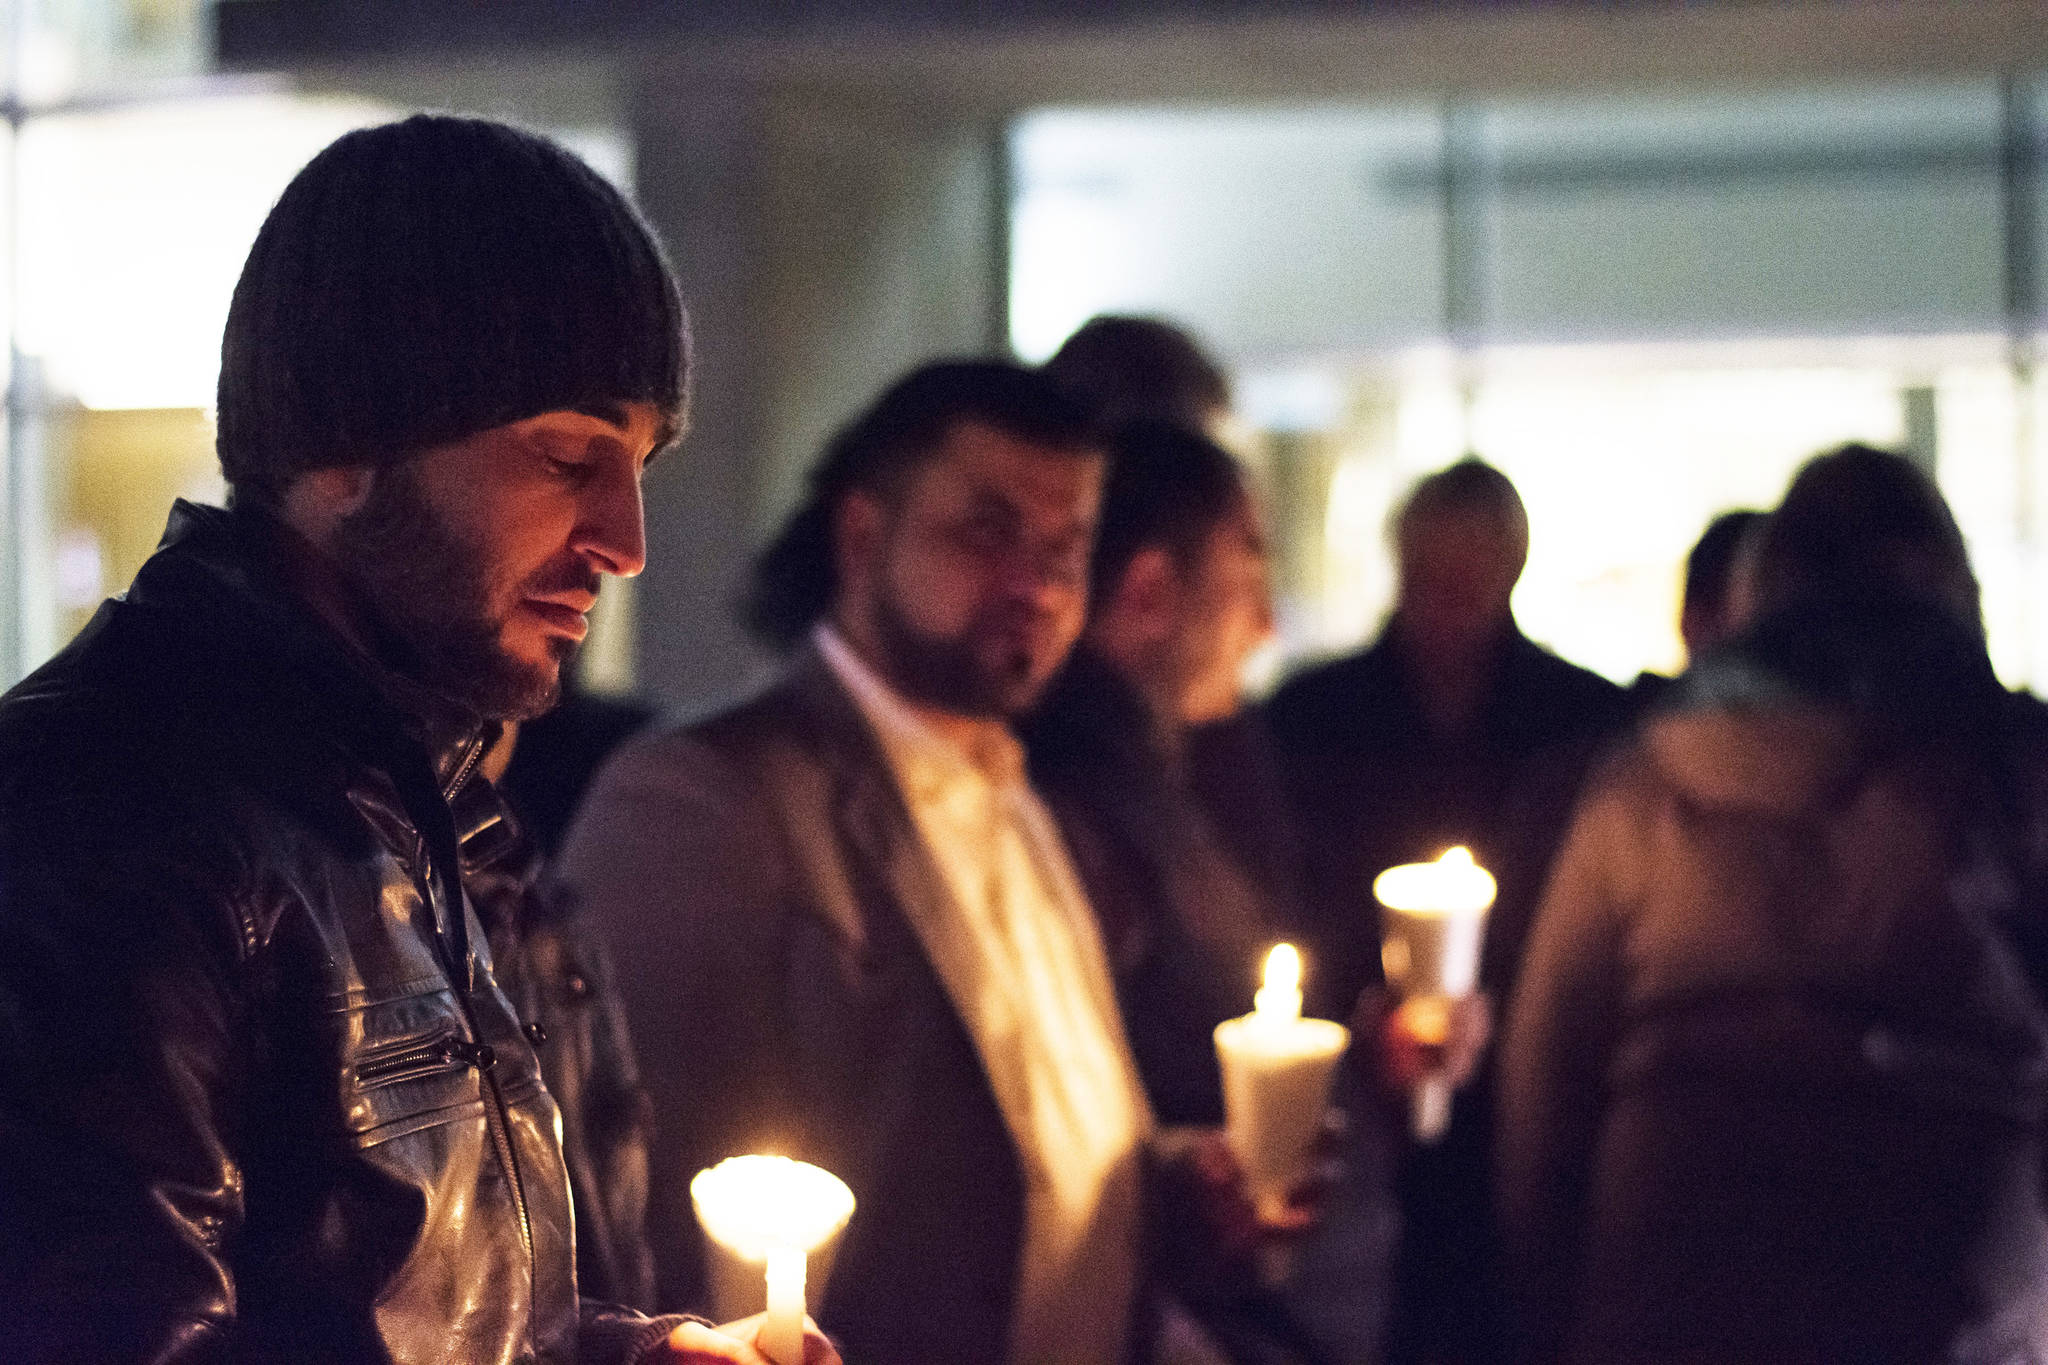 Mustafa Zakreet, Salmon Arm’s first Syrian Refugee has a moment of reflection at the vigil for the victims of the Quebec City mosque shooting on Monday, Jan. 30.